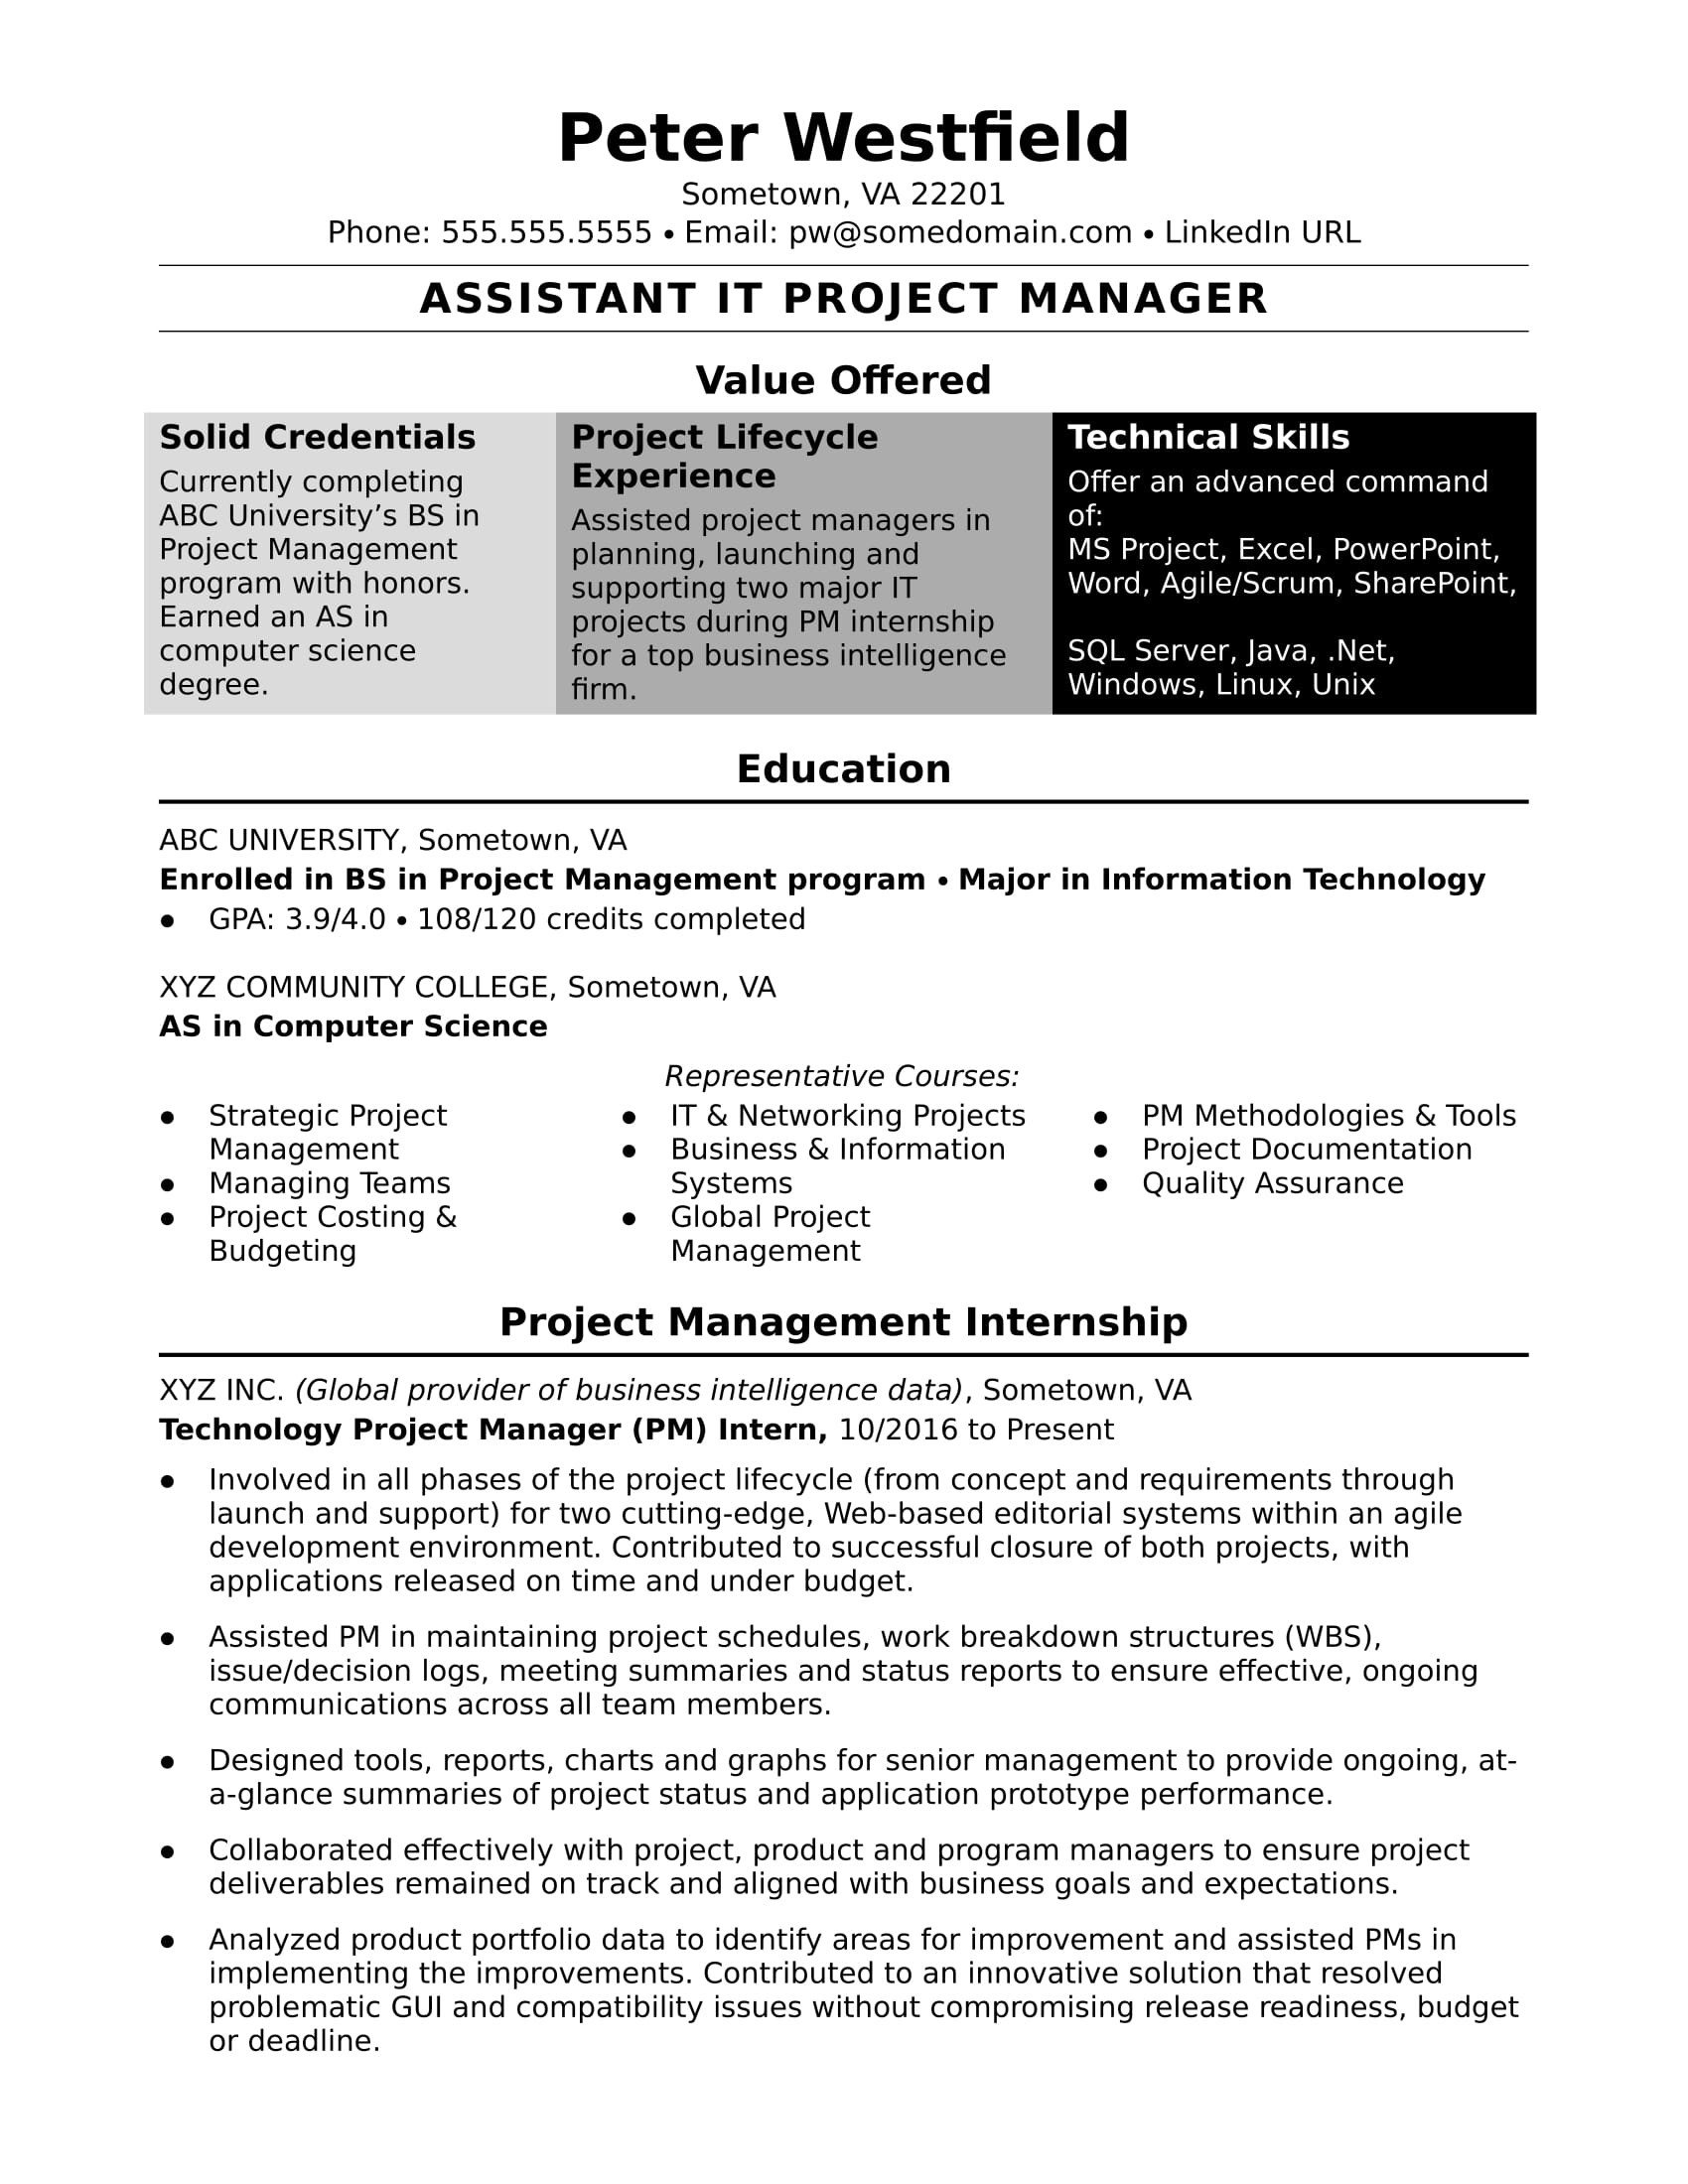 Sample Of Great Project Manager Resume Sample Resume for An assistant It Project Manager Monster.com